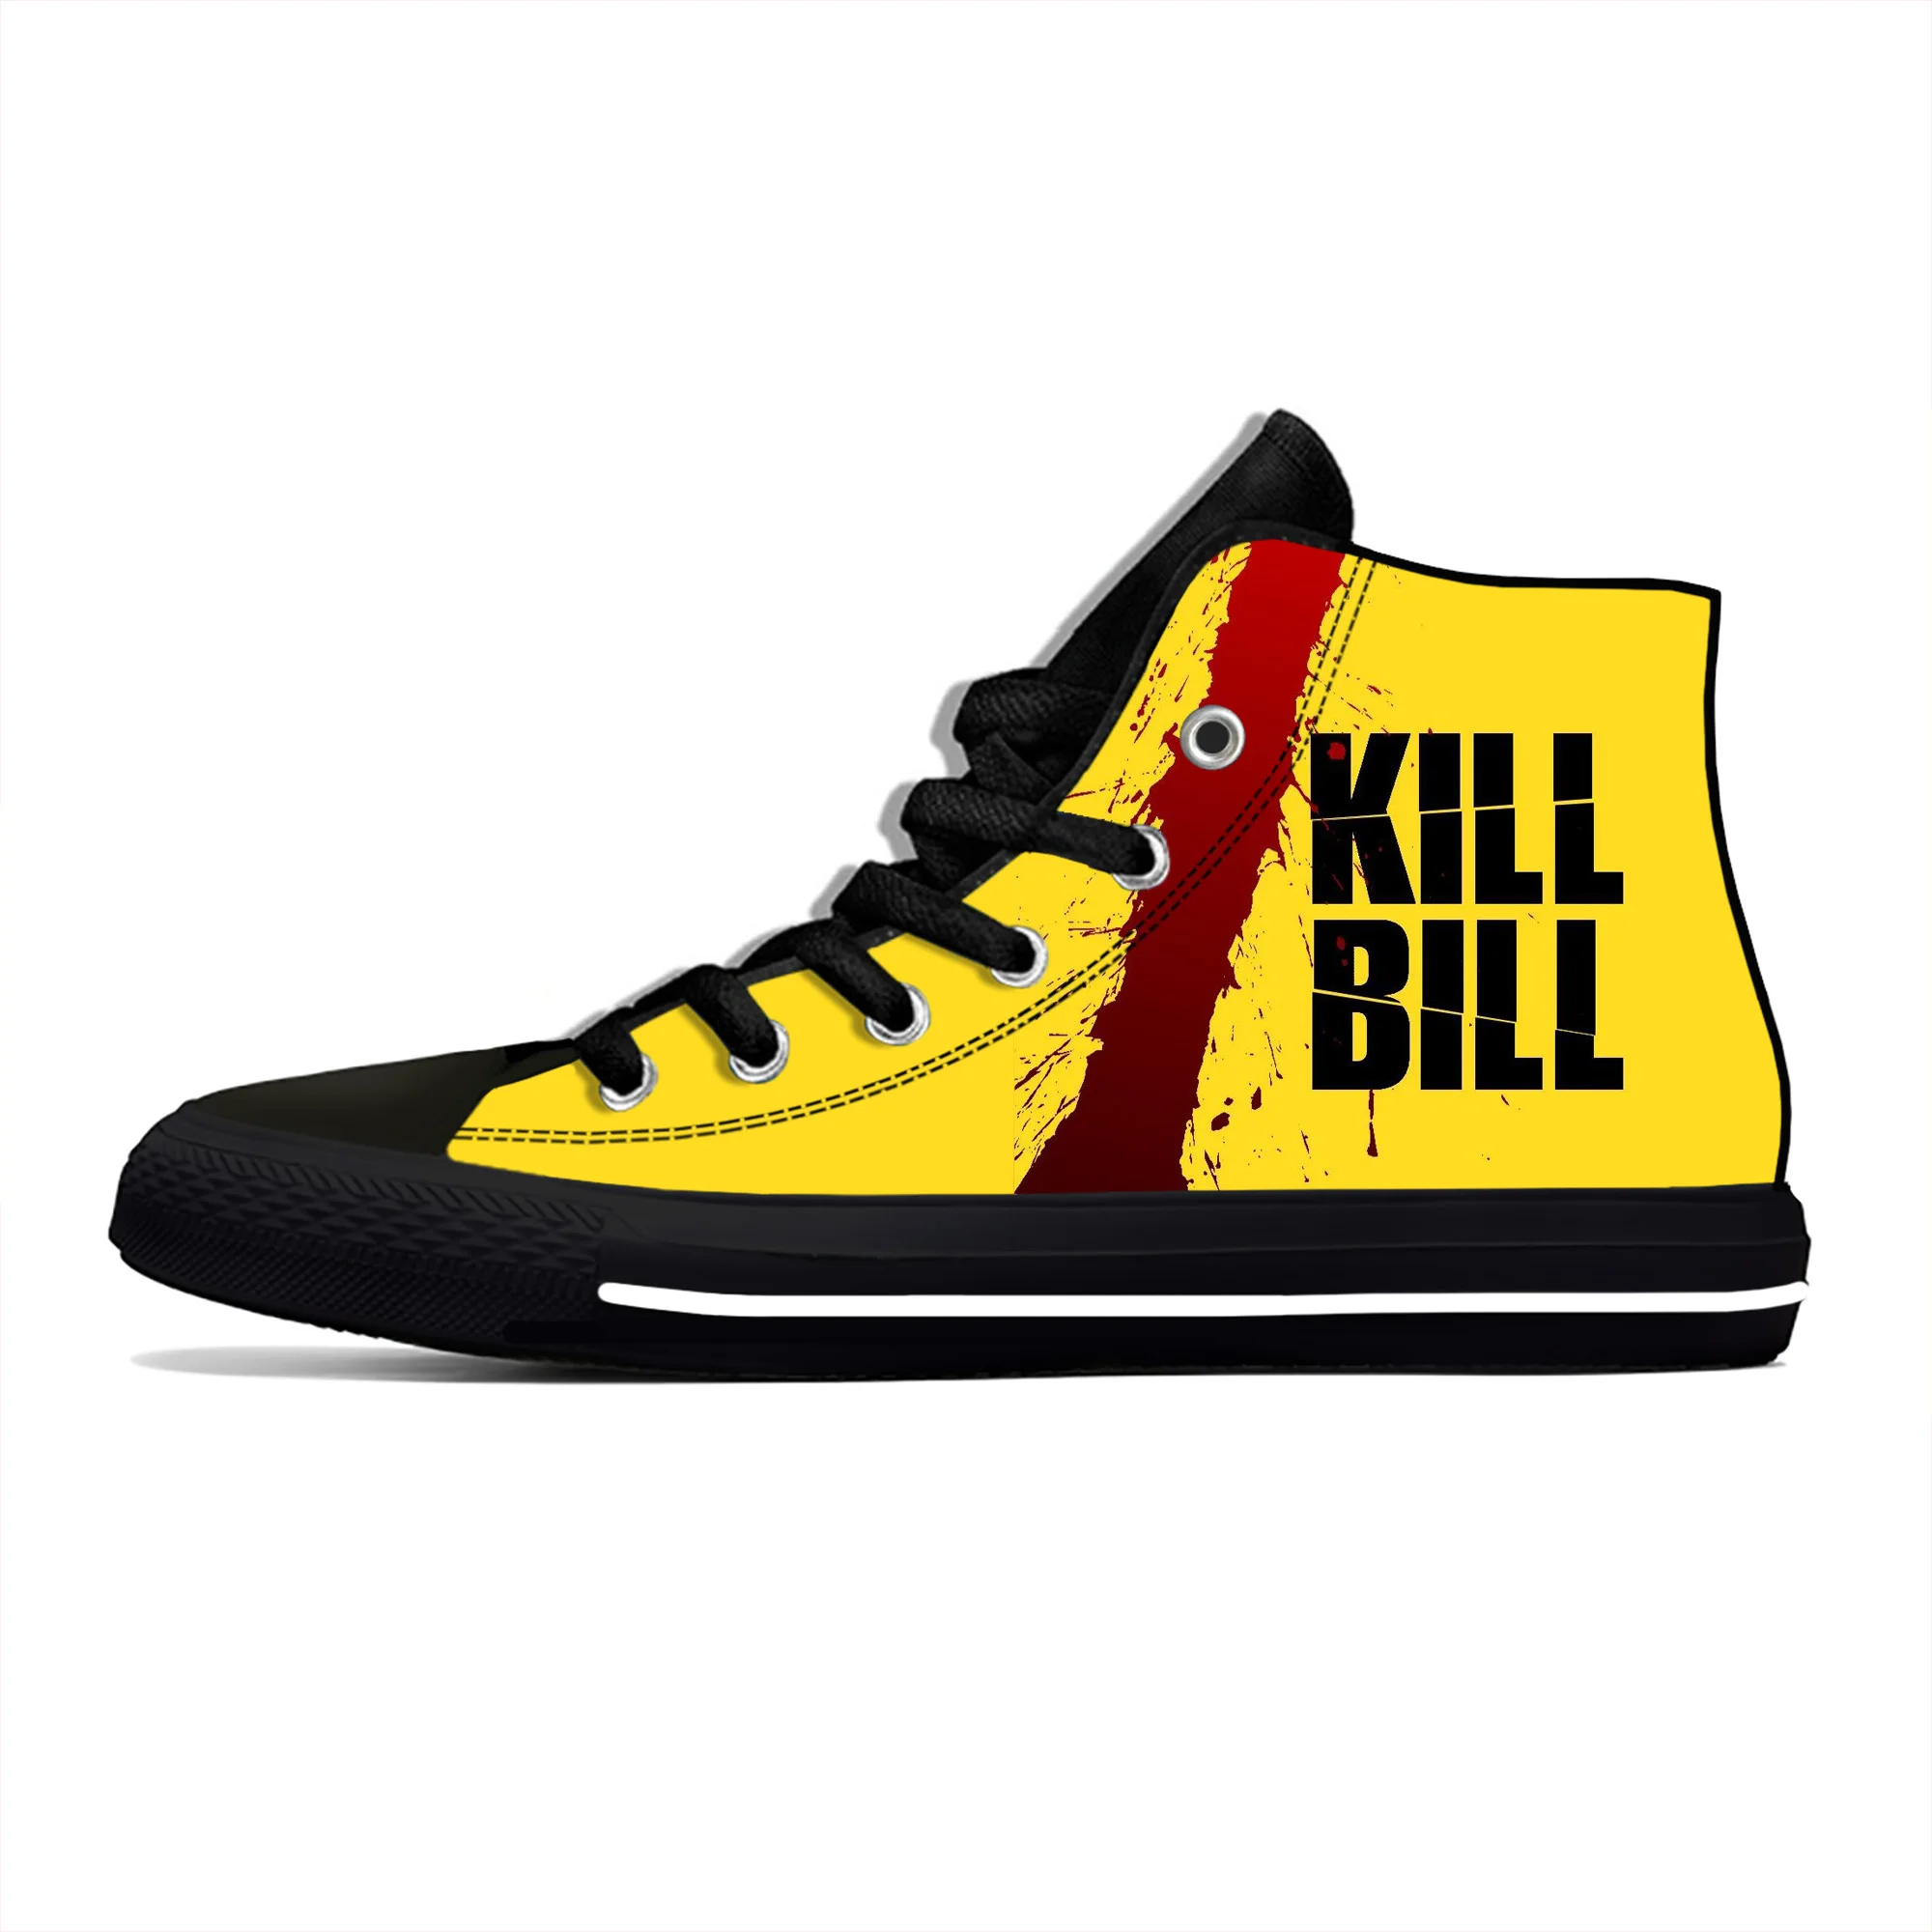 

Movie Kill Bill High Top Sneakers Mens Womens Teenager Casual Shoes Canvas Running Shoes 3D Printed Breathable Lightweight shoe